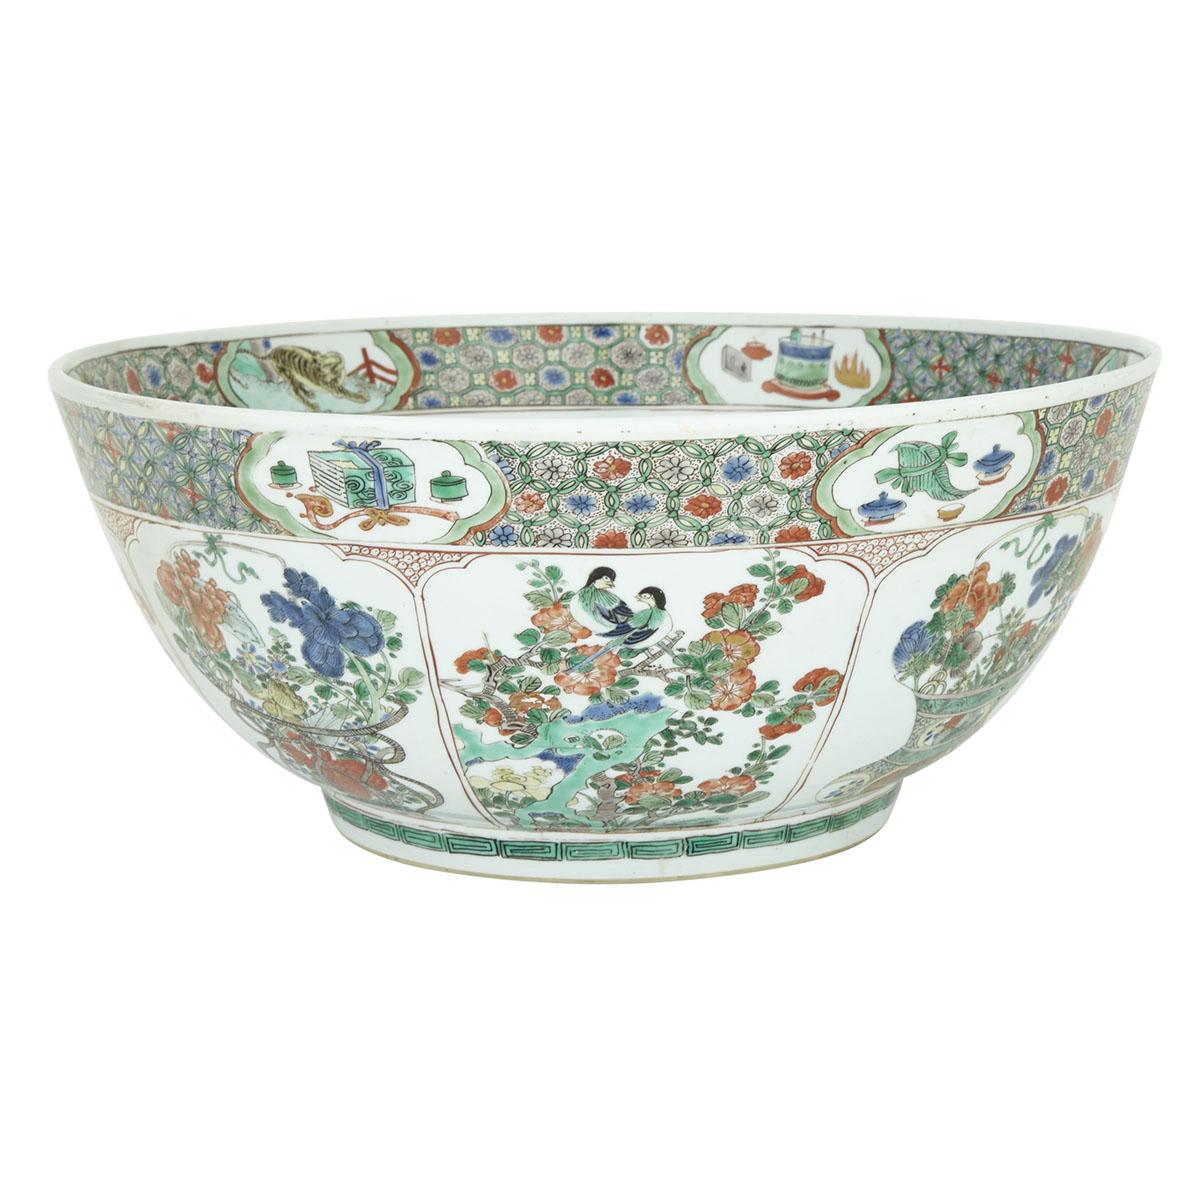 A MASSIVE FAMILLE-VERTE WUCAI PUNCH BOWL, MARK AND PERIOD OF KANGXI (1662-1772) 清康熙 五彩牡丹瑞果紋大碗 Finely - Image 2 of 10